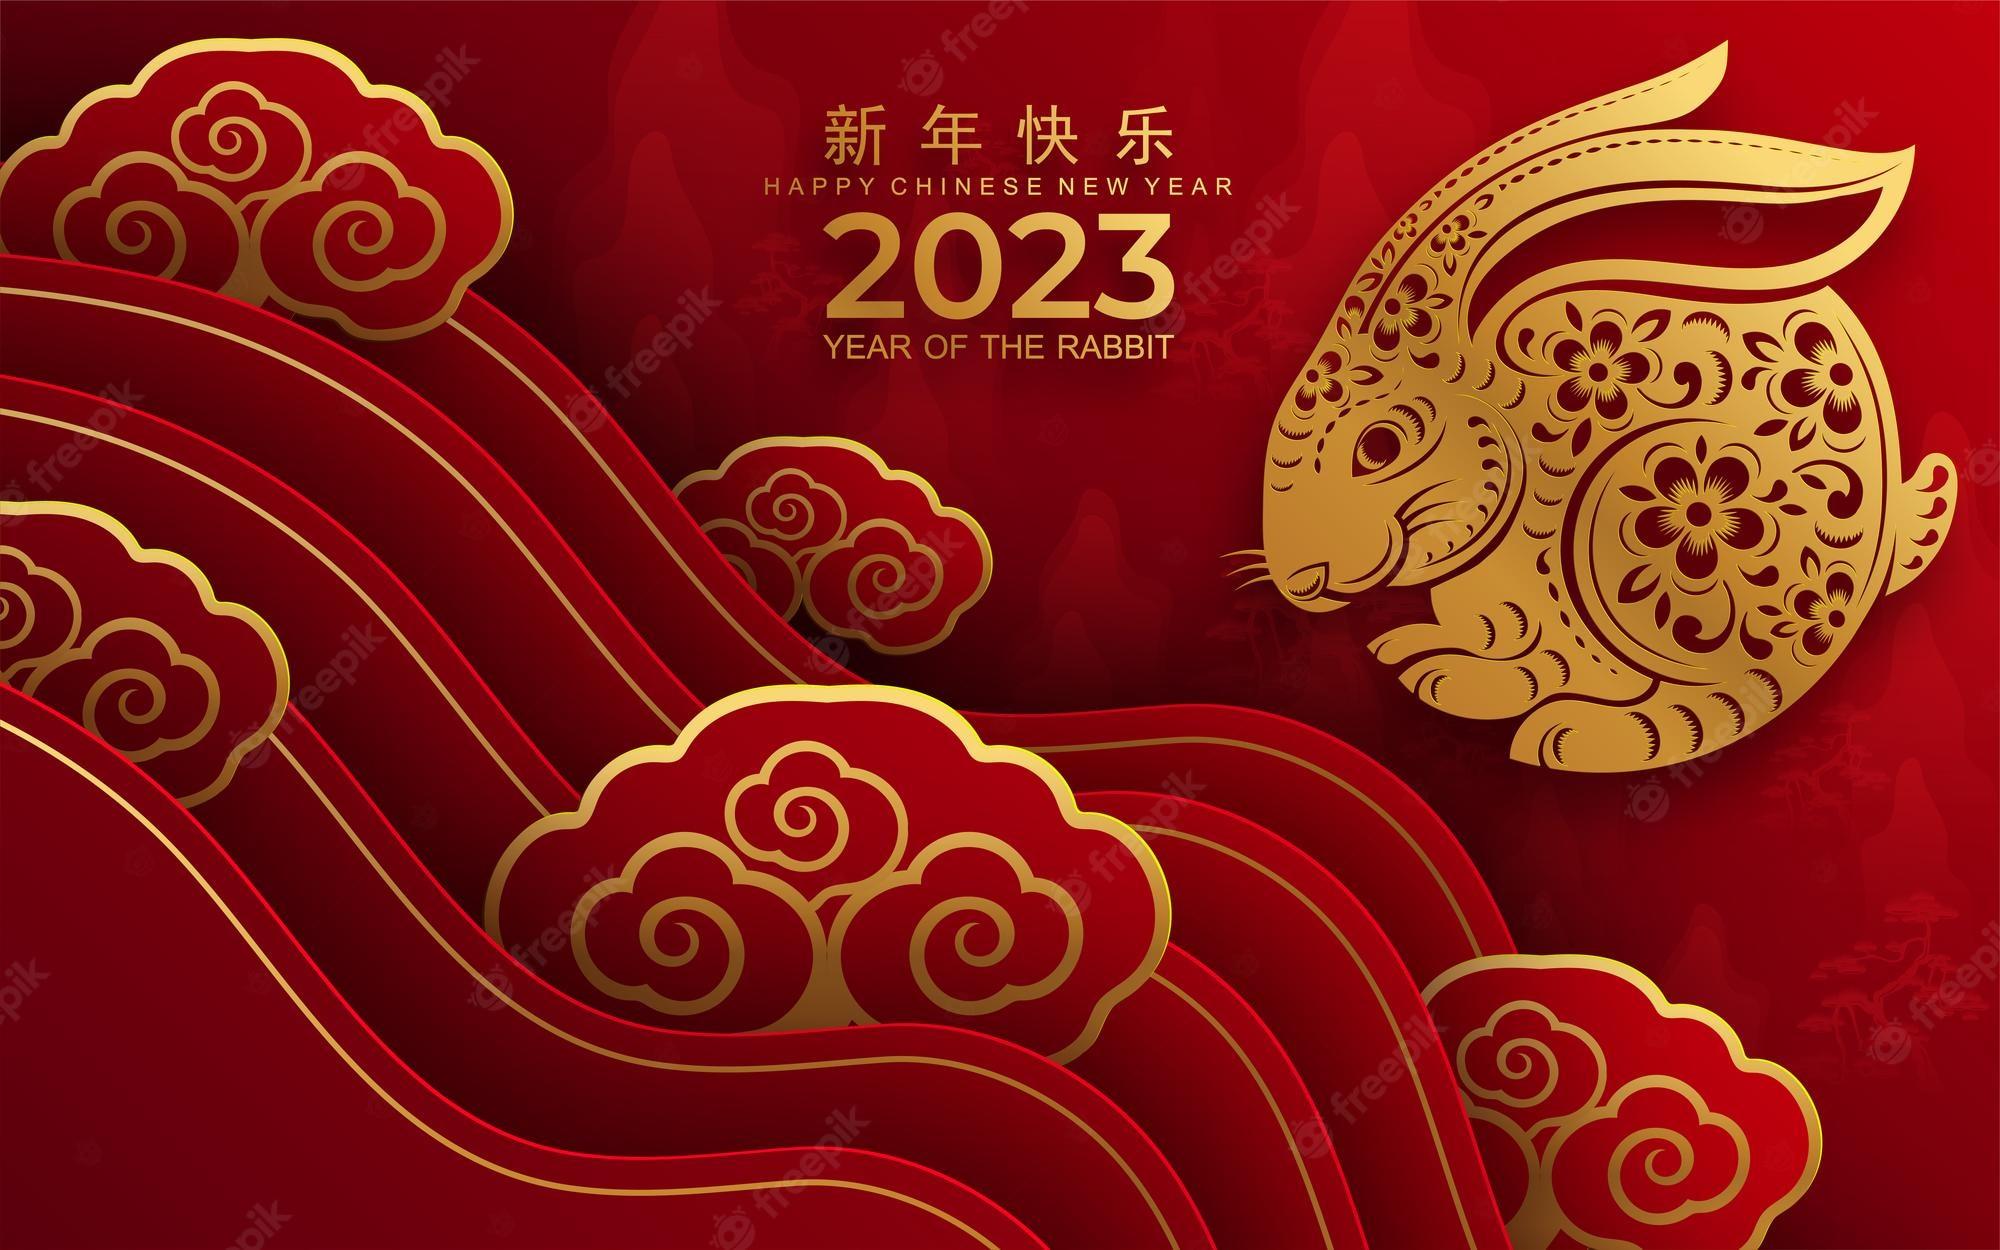 Chinese New Year Wallpapers 2023  Download Free HD Chinese New Year Images